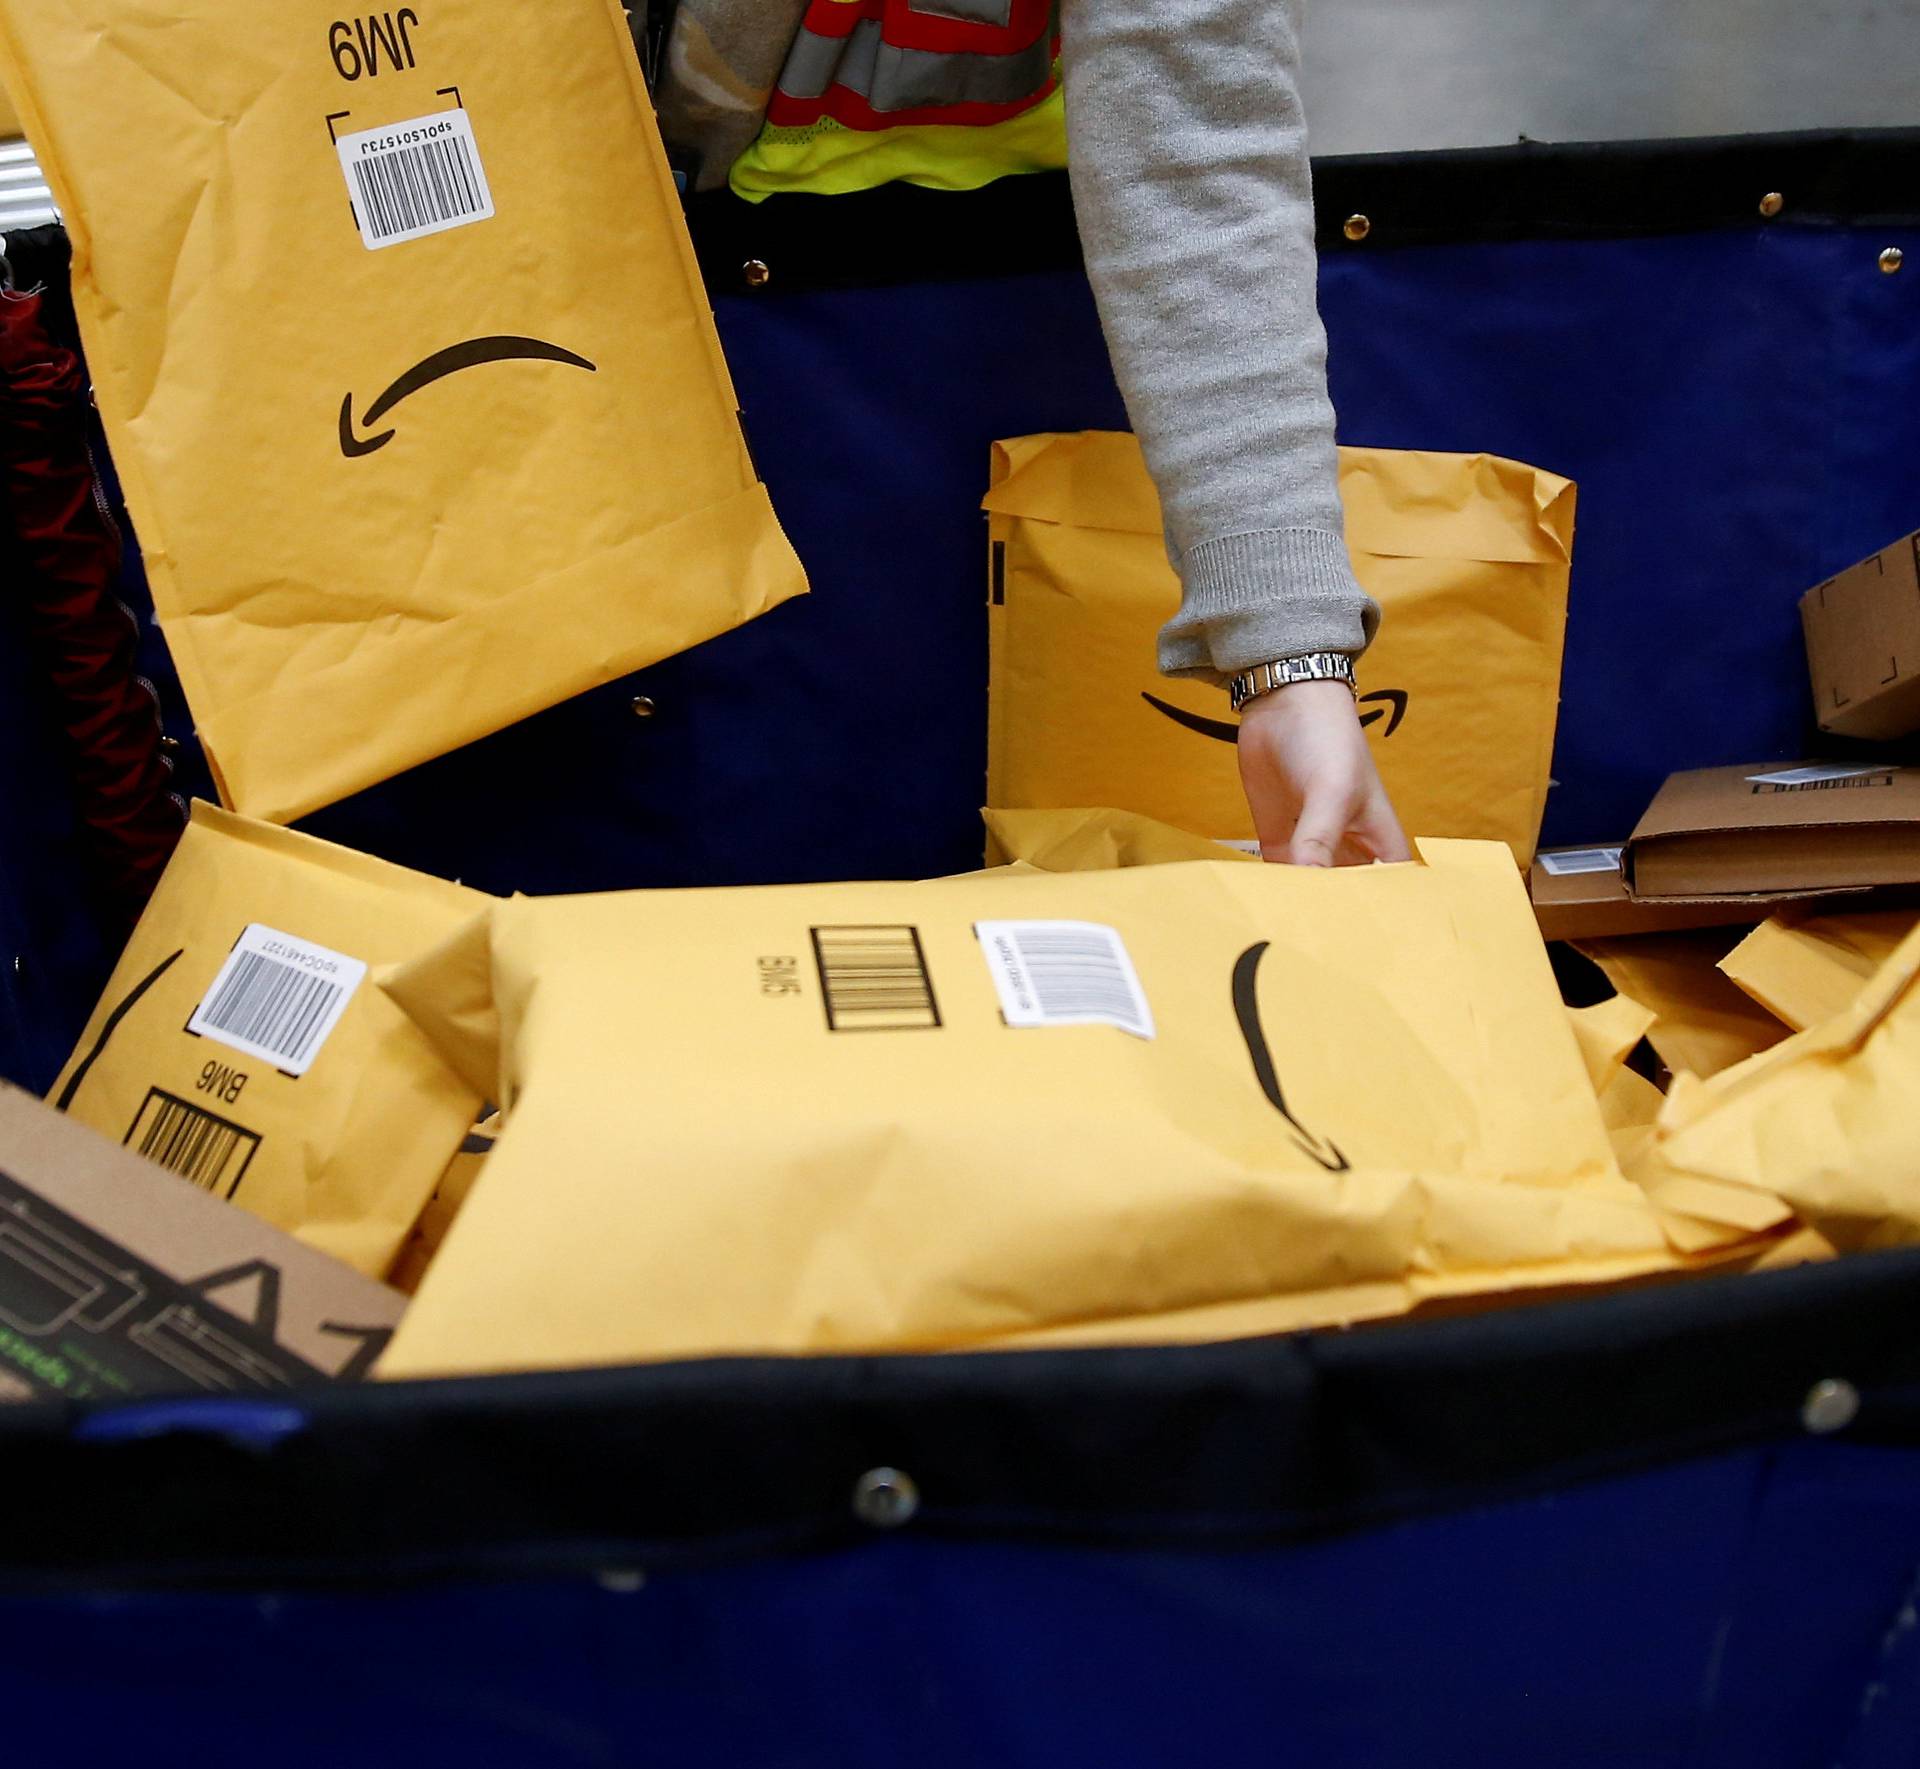 FILE PHOTO: Area manager Wells retrieves packages to put them on a conveyor line for scanning and labeling at the Amazon fulfillment center in Kent